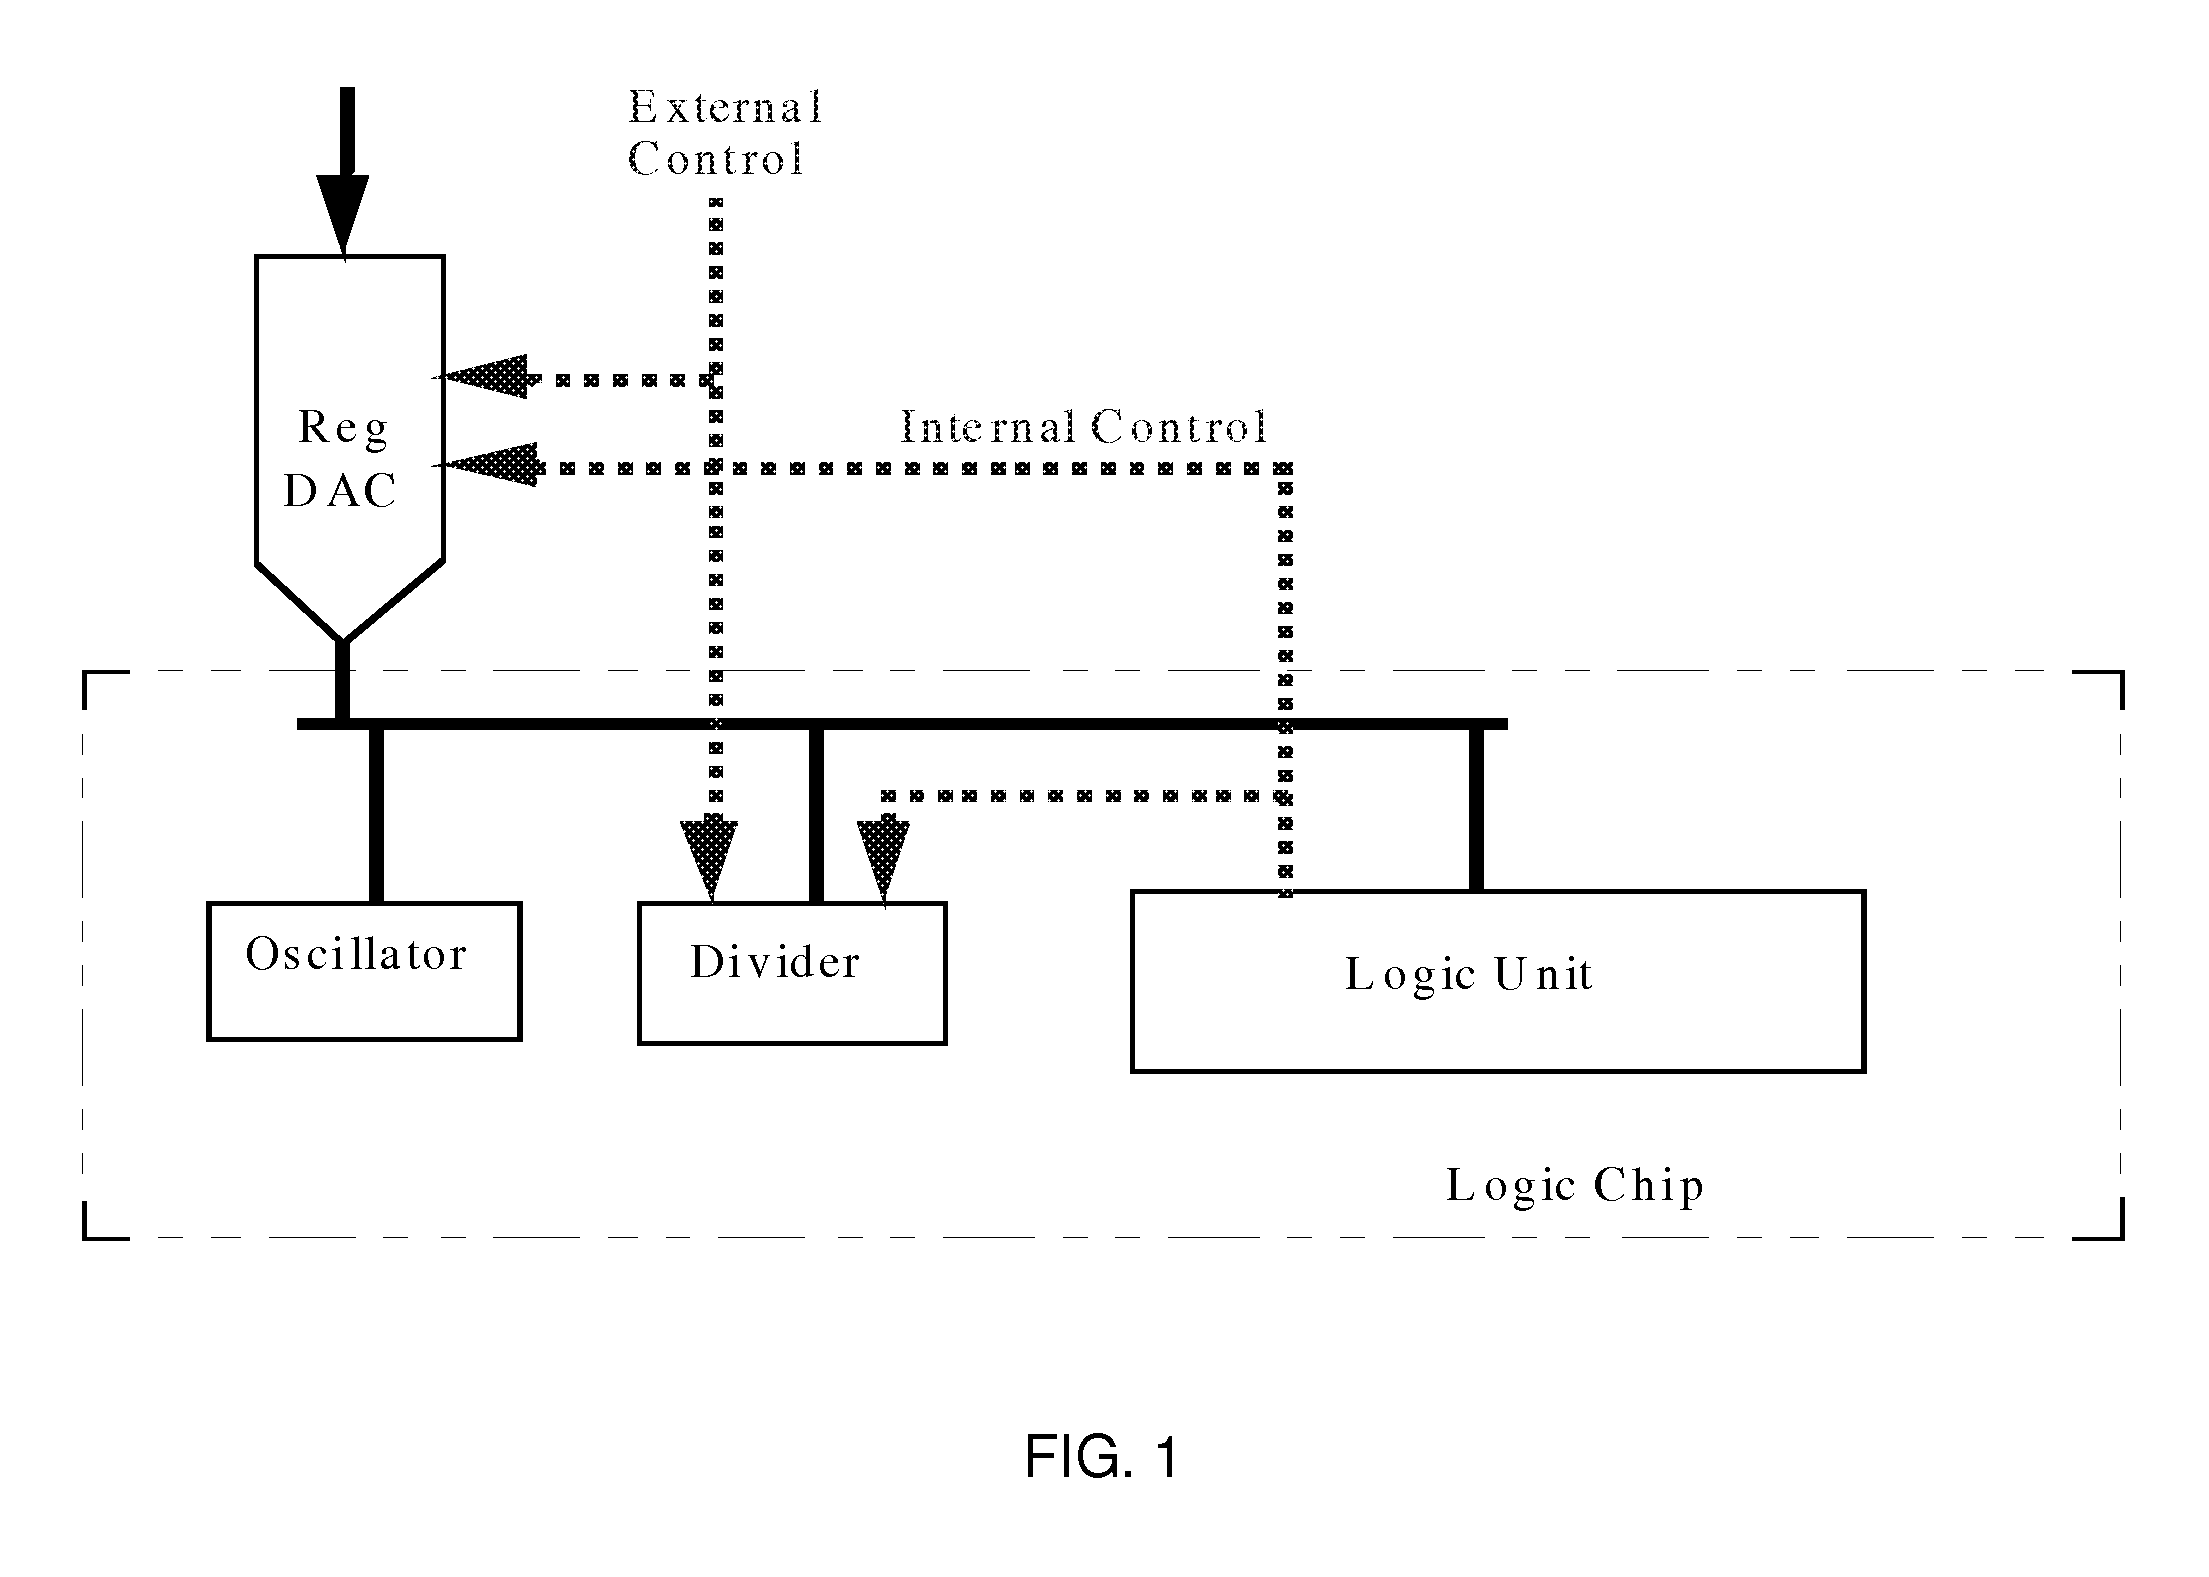 Power management architecture and method of modulating oscillator frequency based on voltage supply